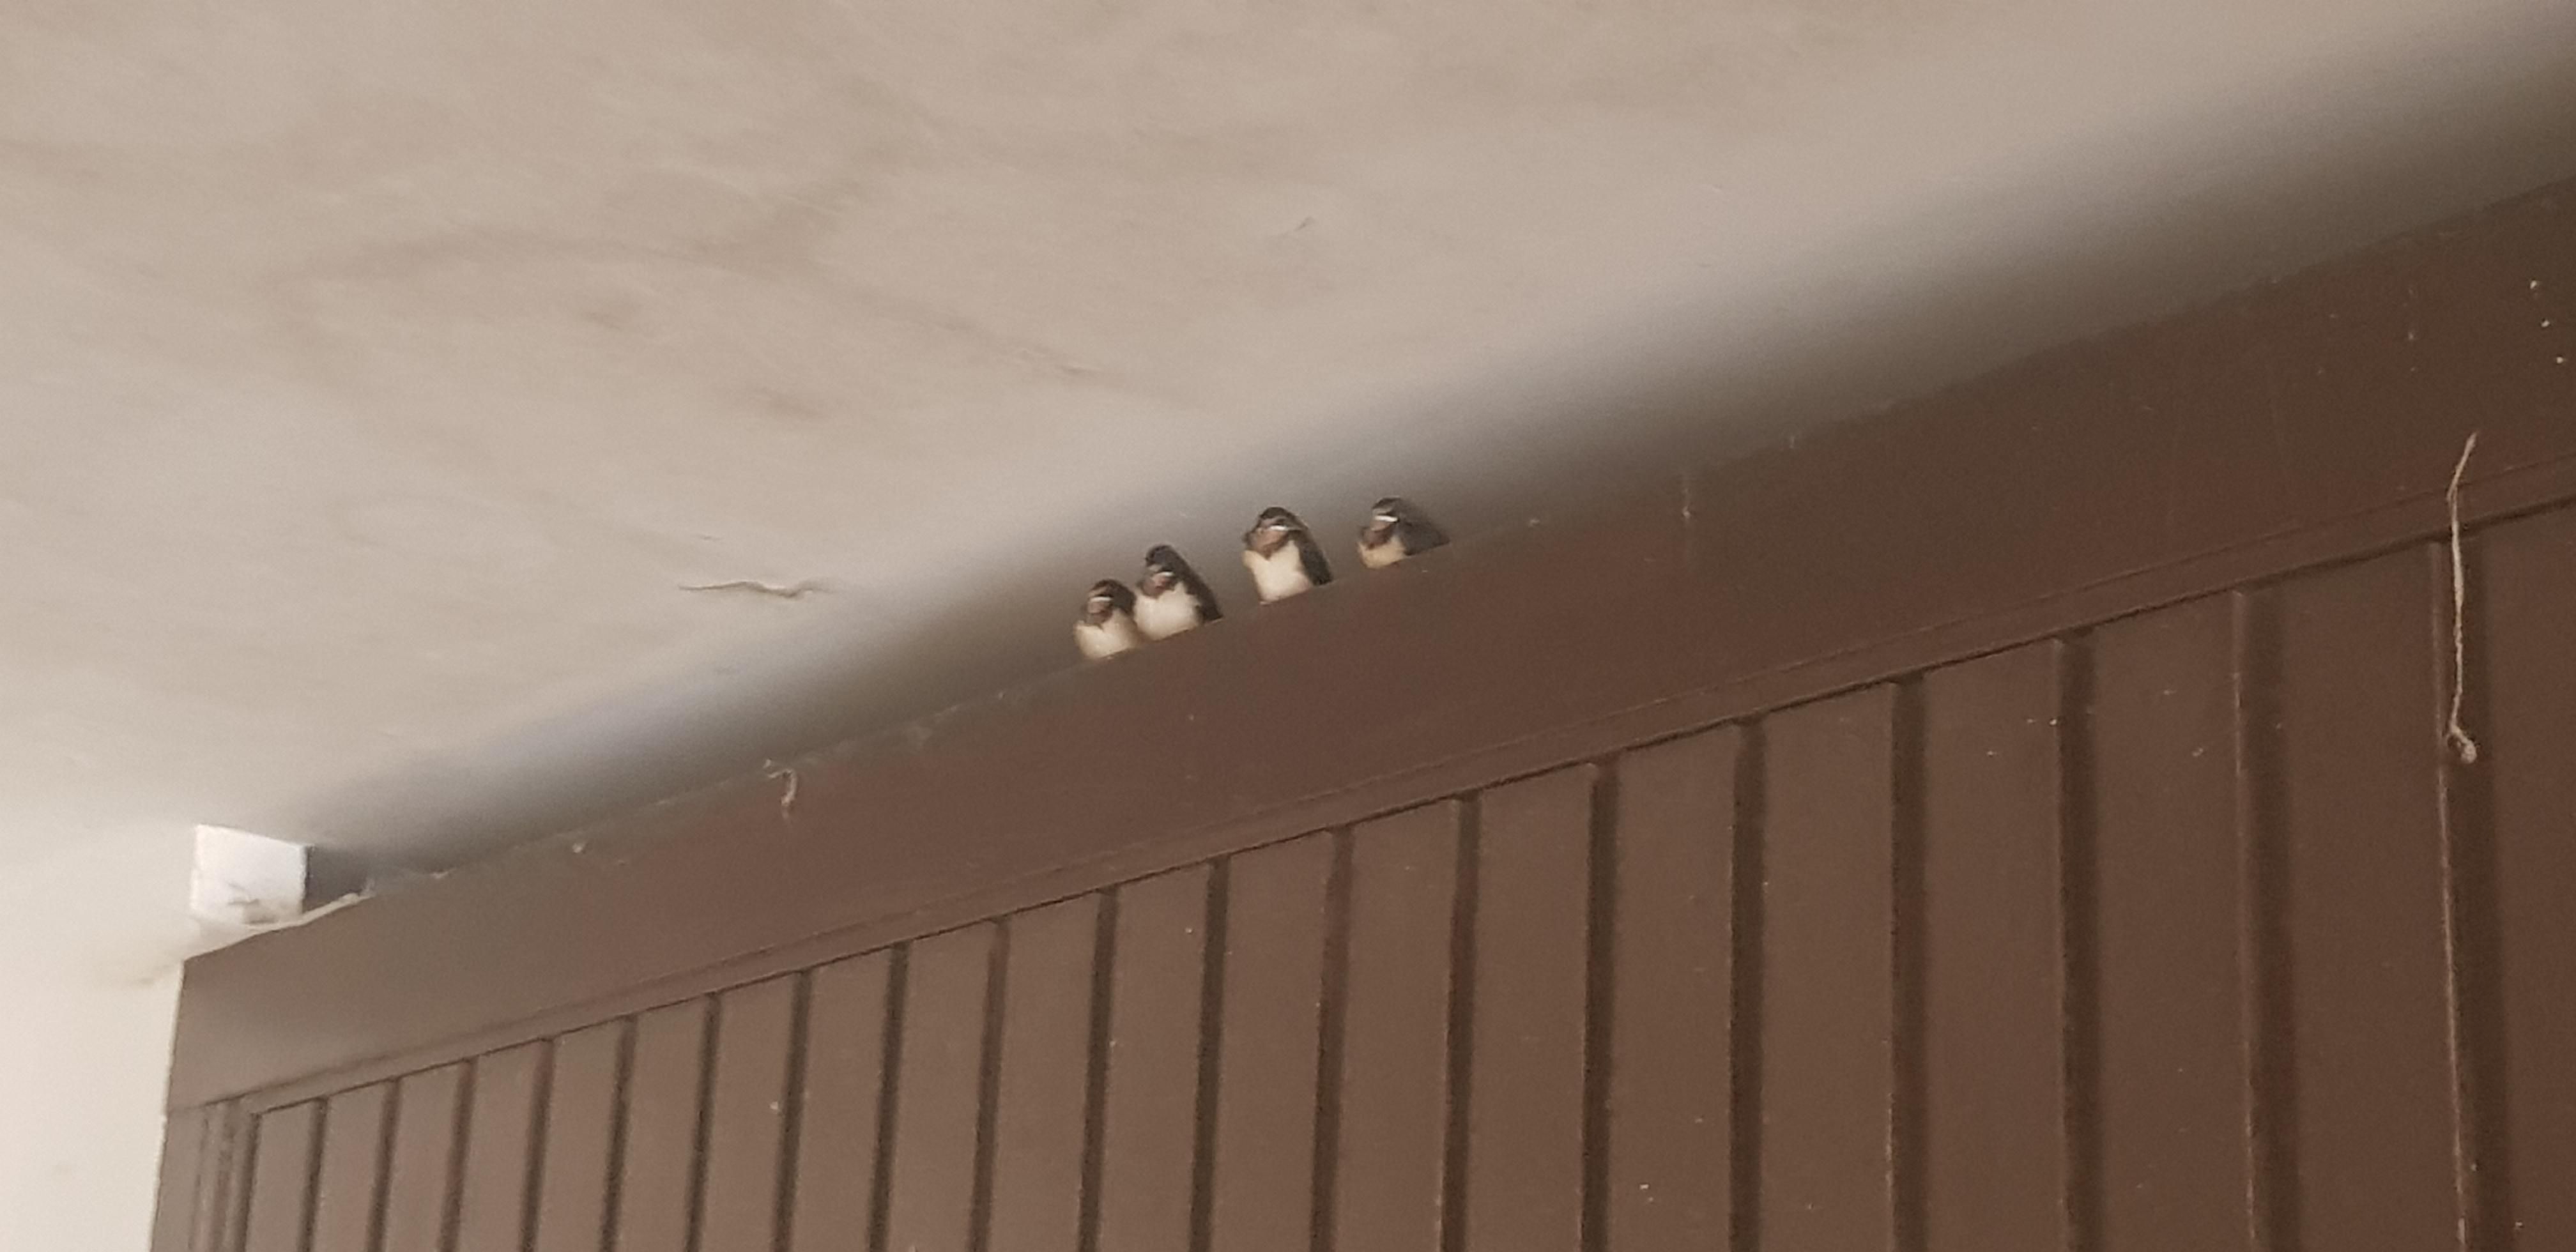 These swallow chicks looking like the Penguins of Madagascar